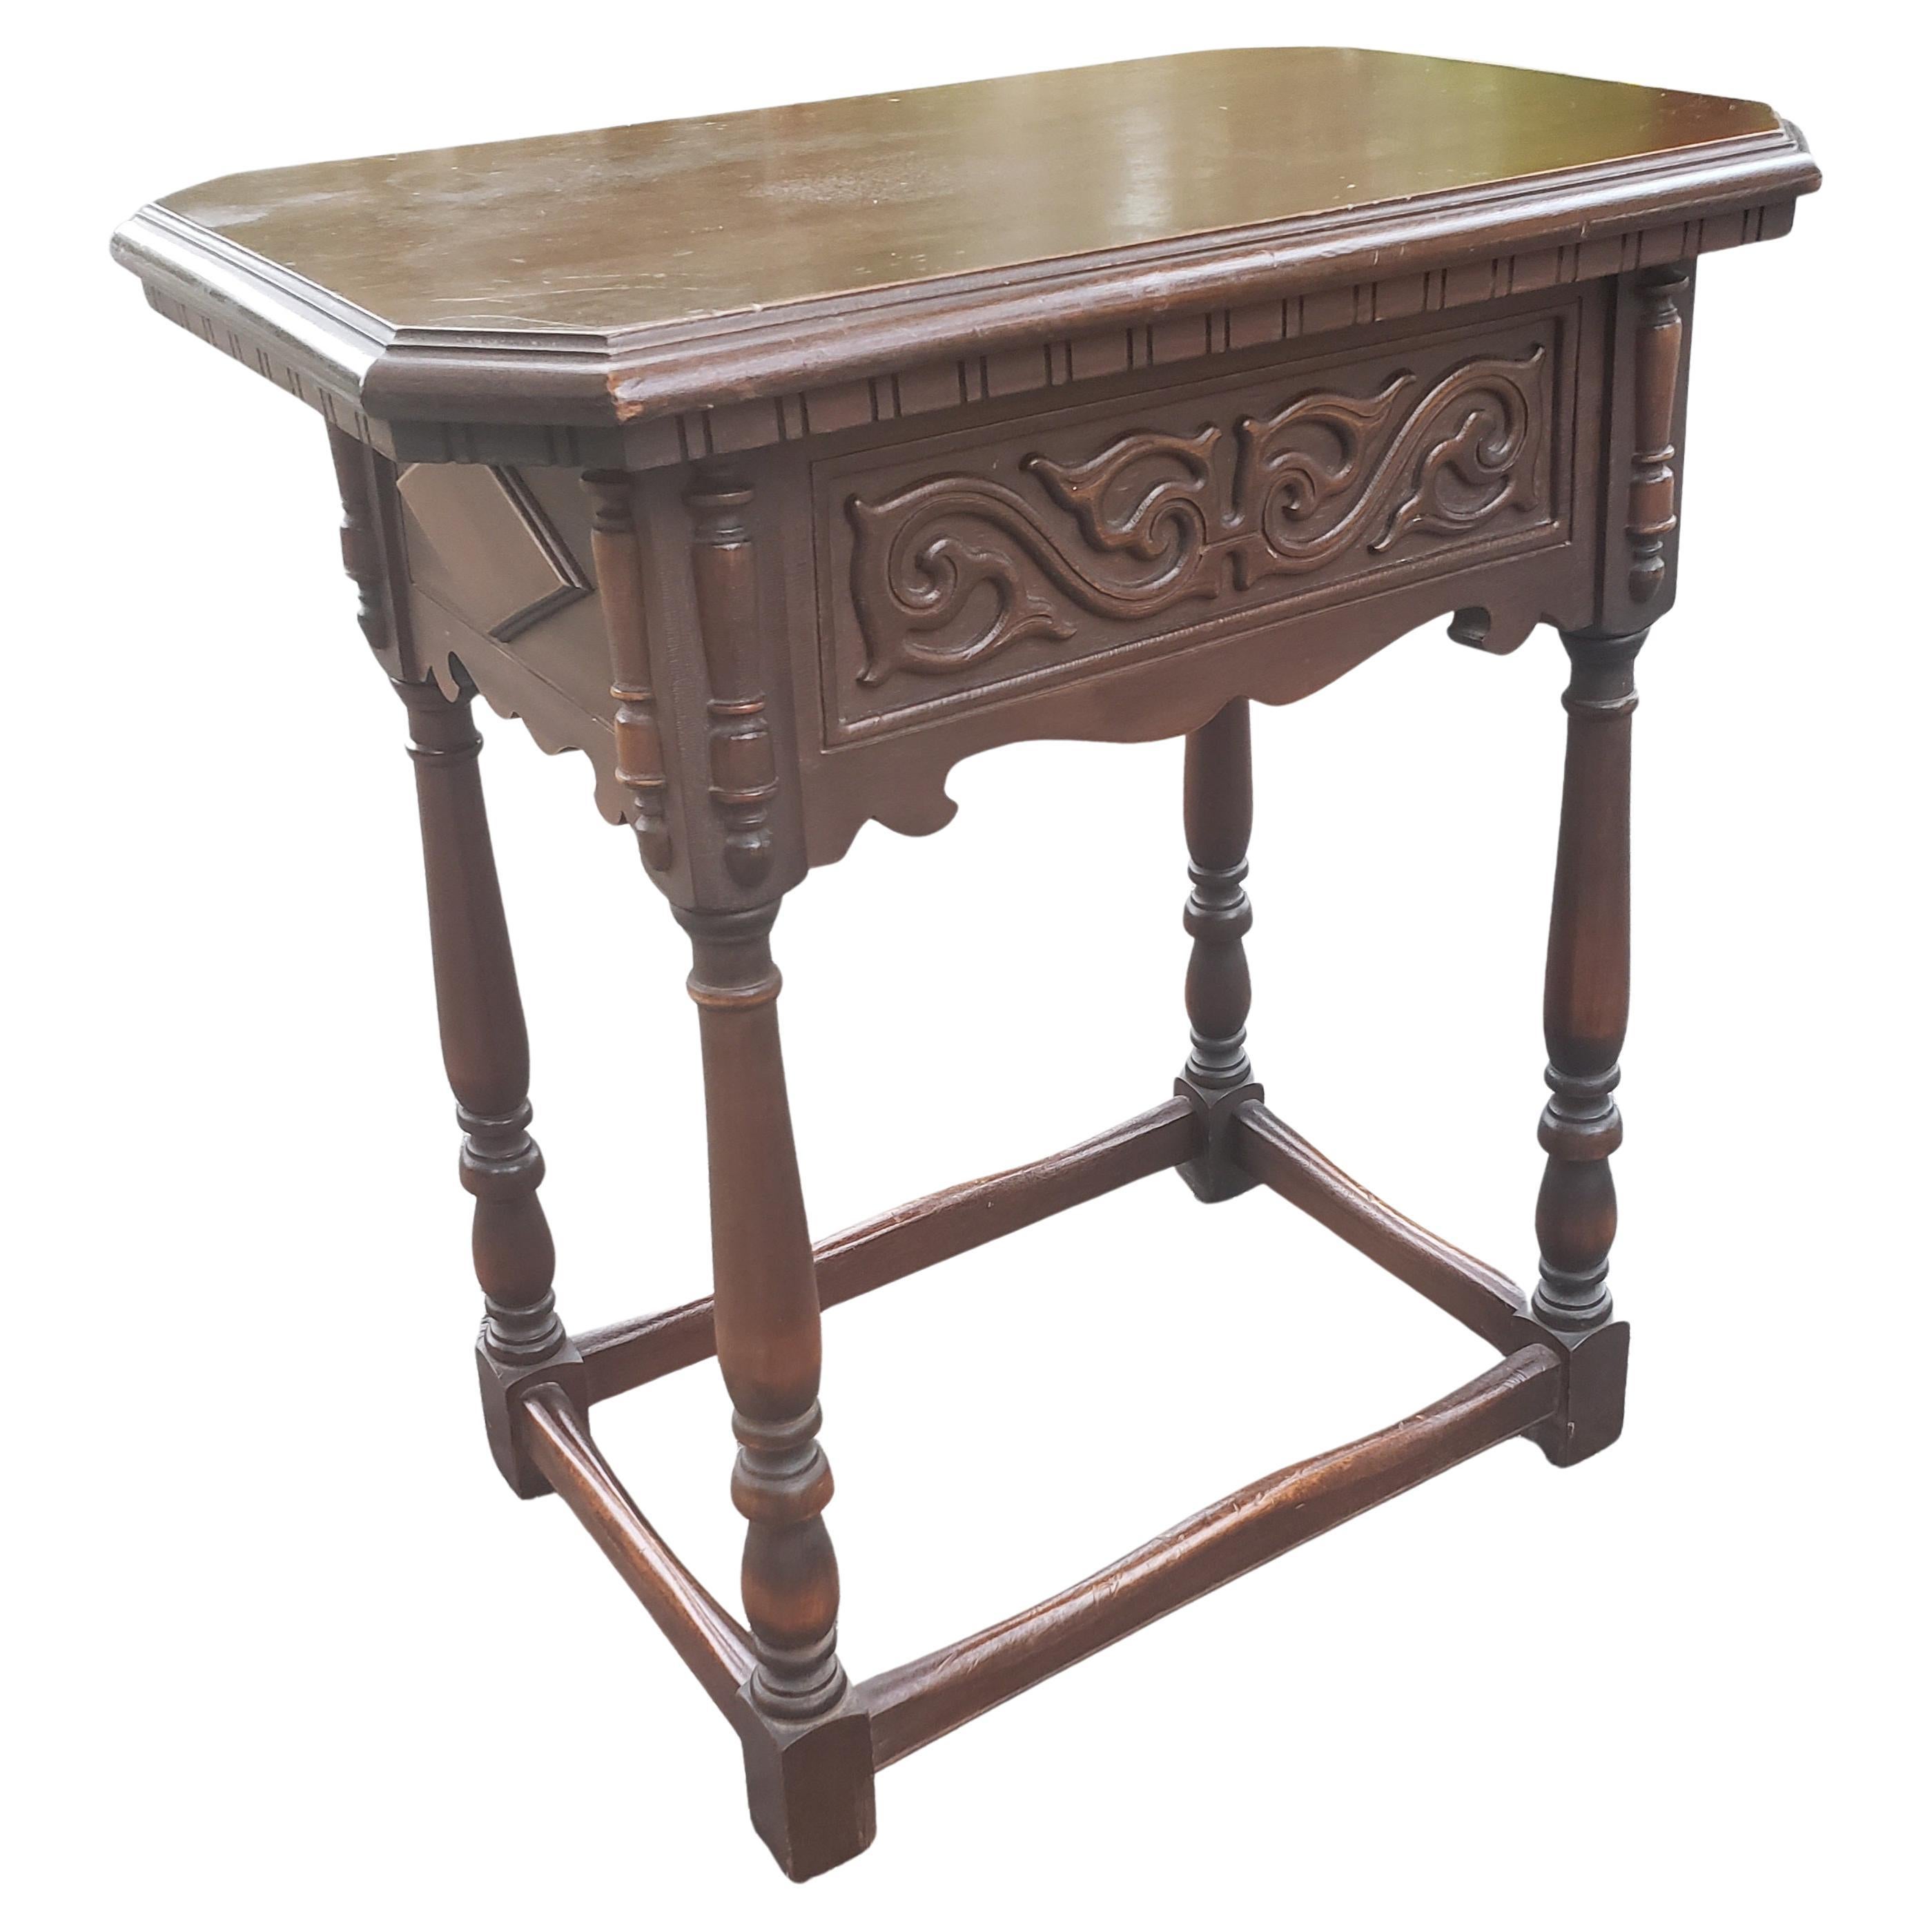 Antique Edwardian Carved Walnut Side Table, Circa 1920s For Sale